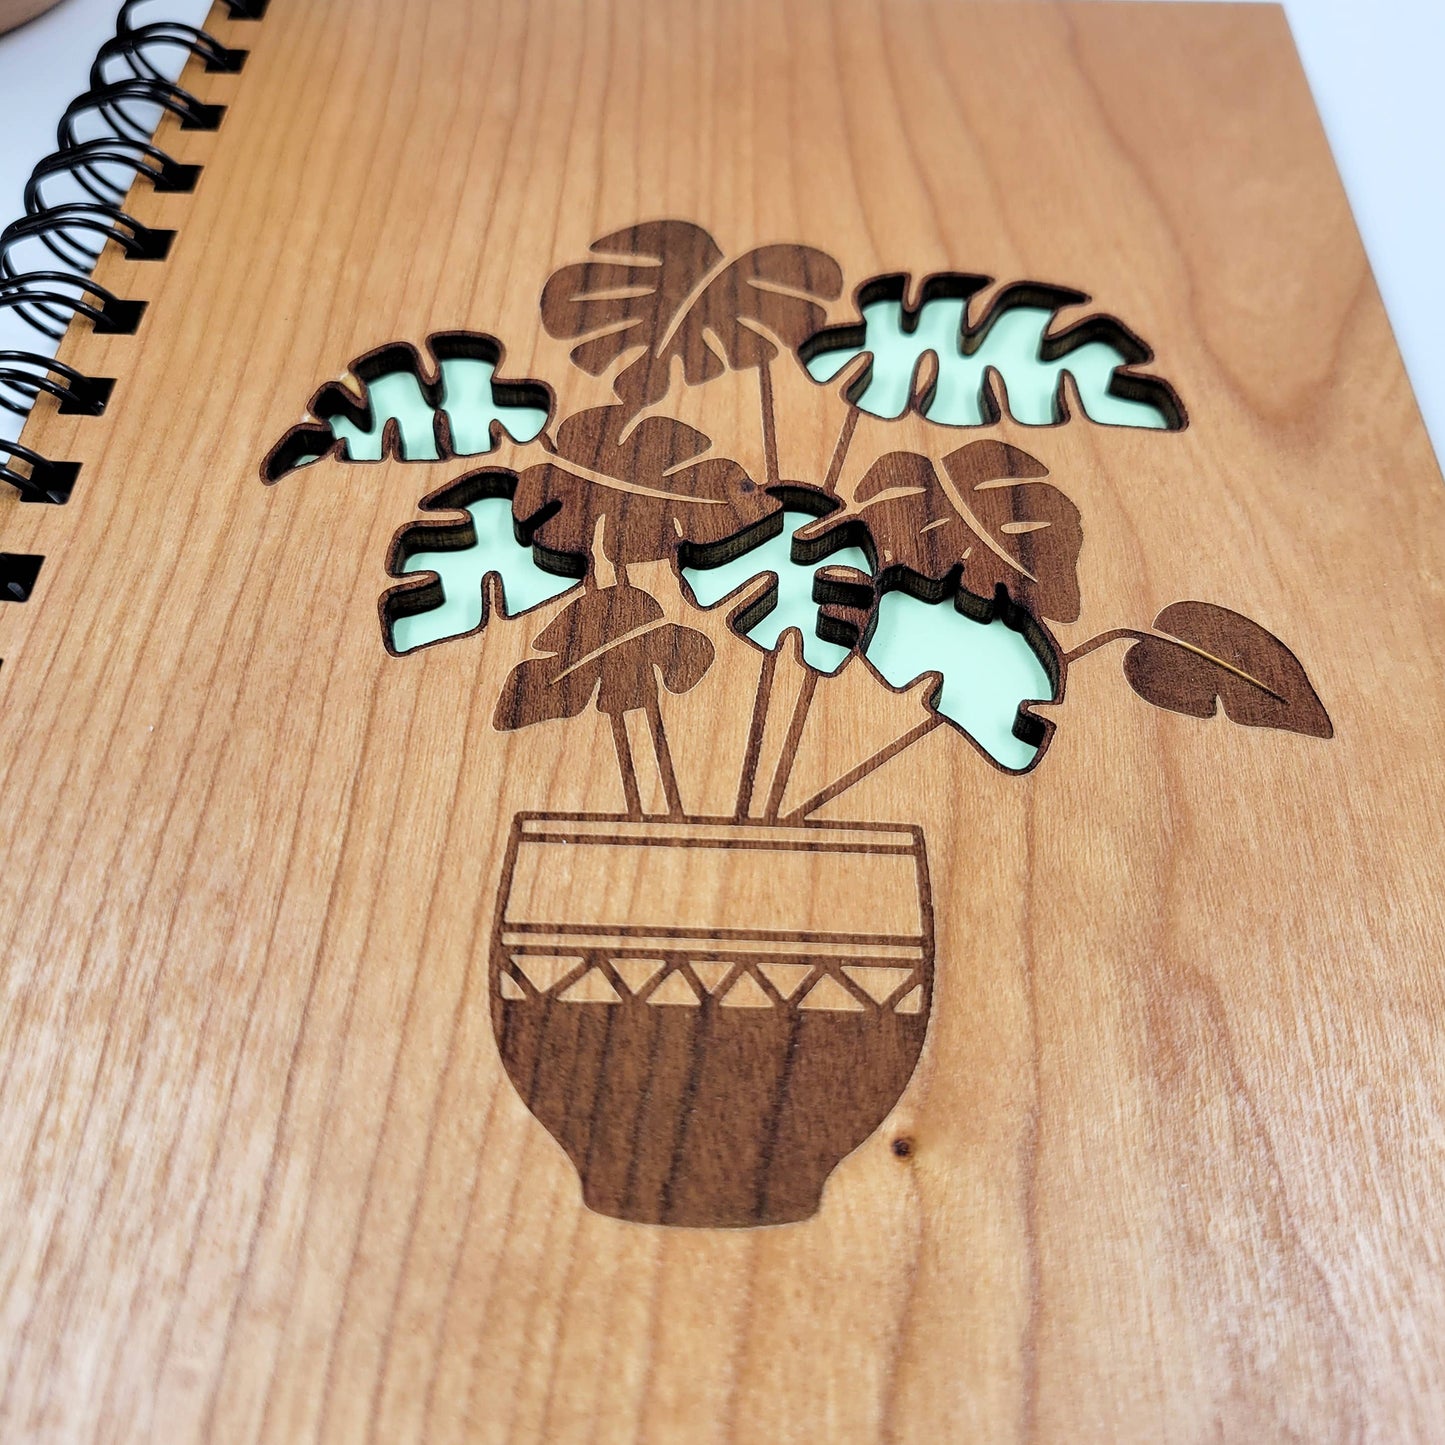 Monstera Plant Wood Journal - Stationery, Journals, Notebook: Lined